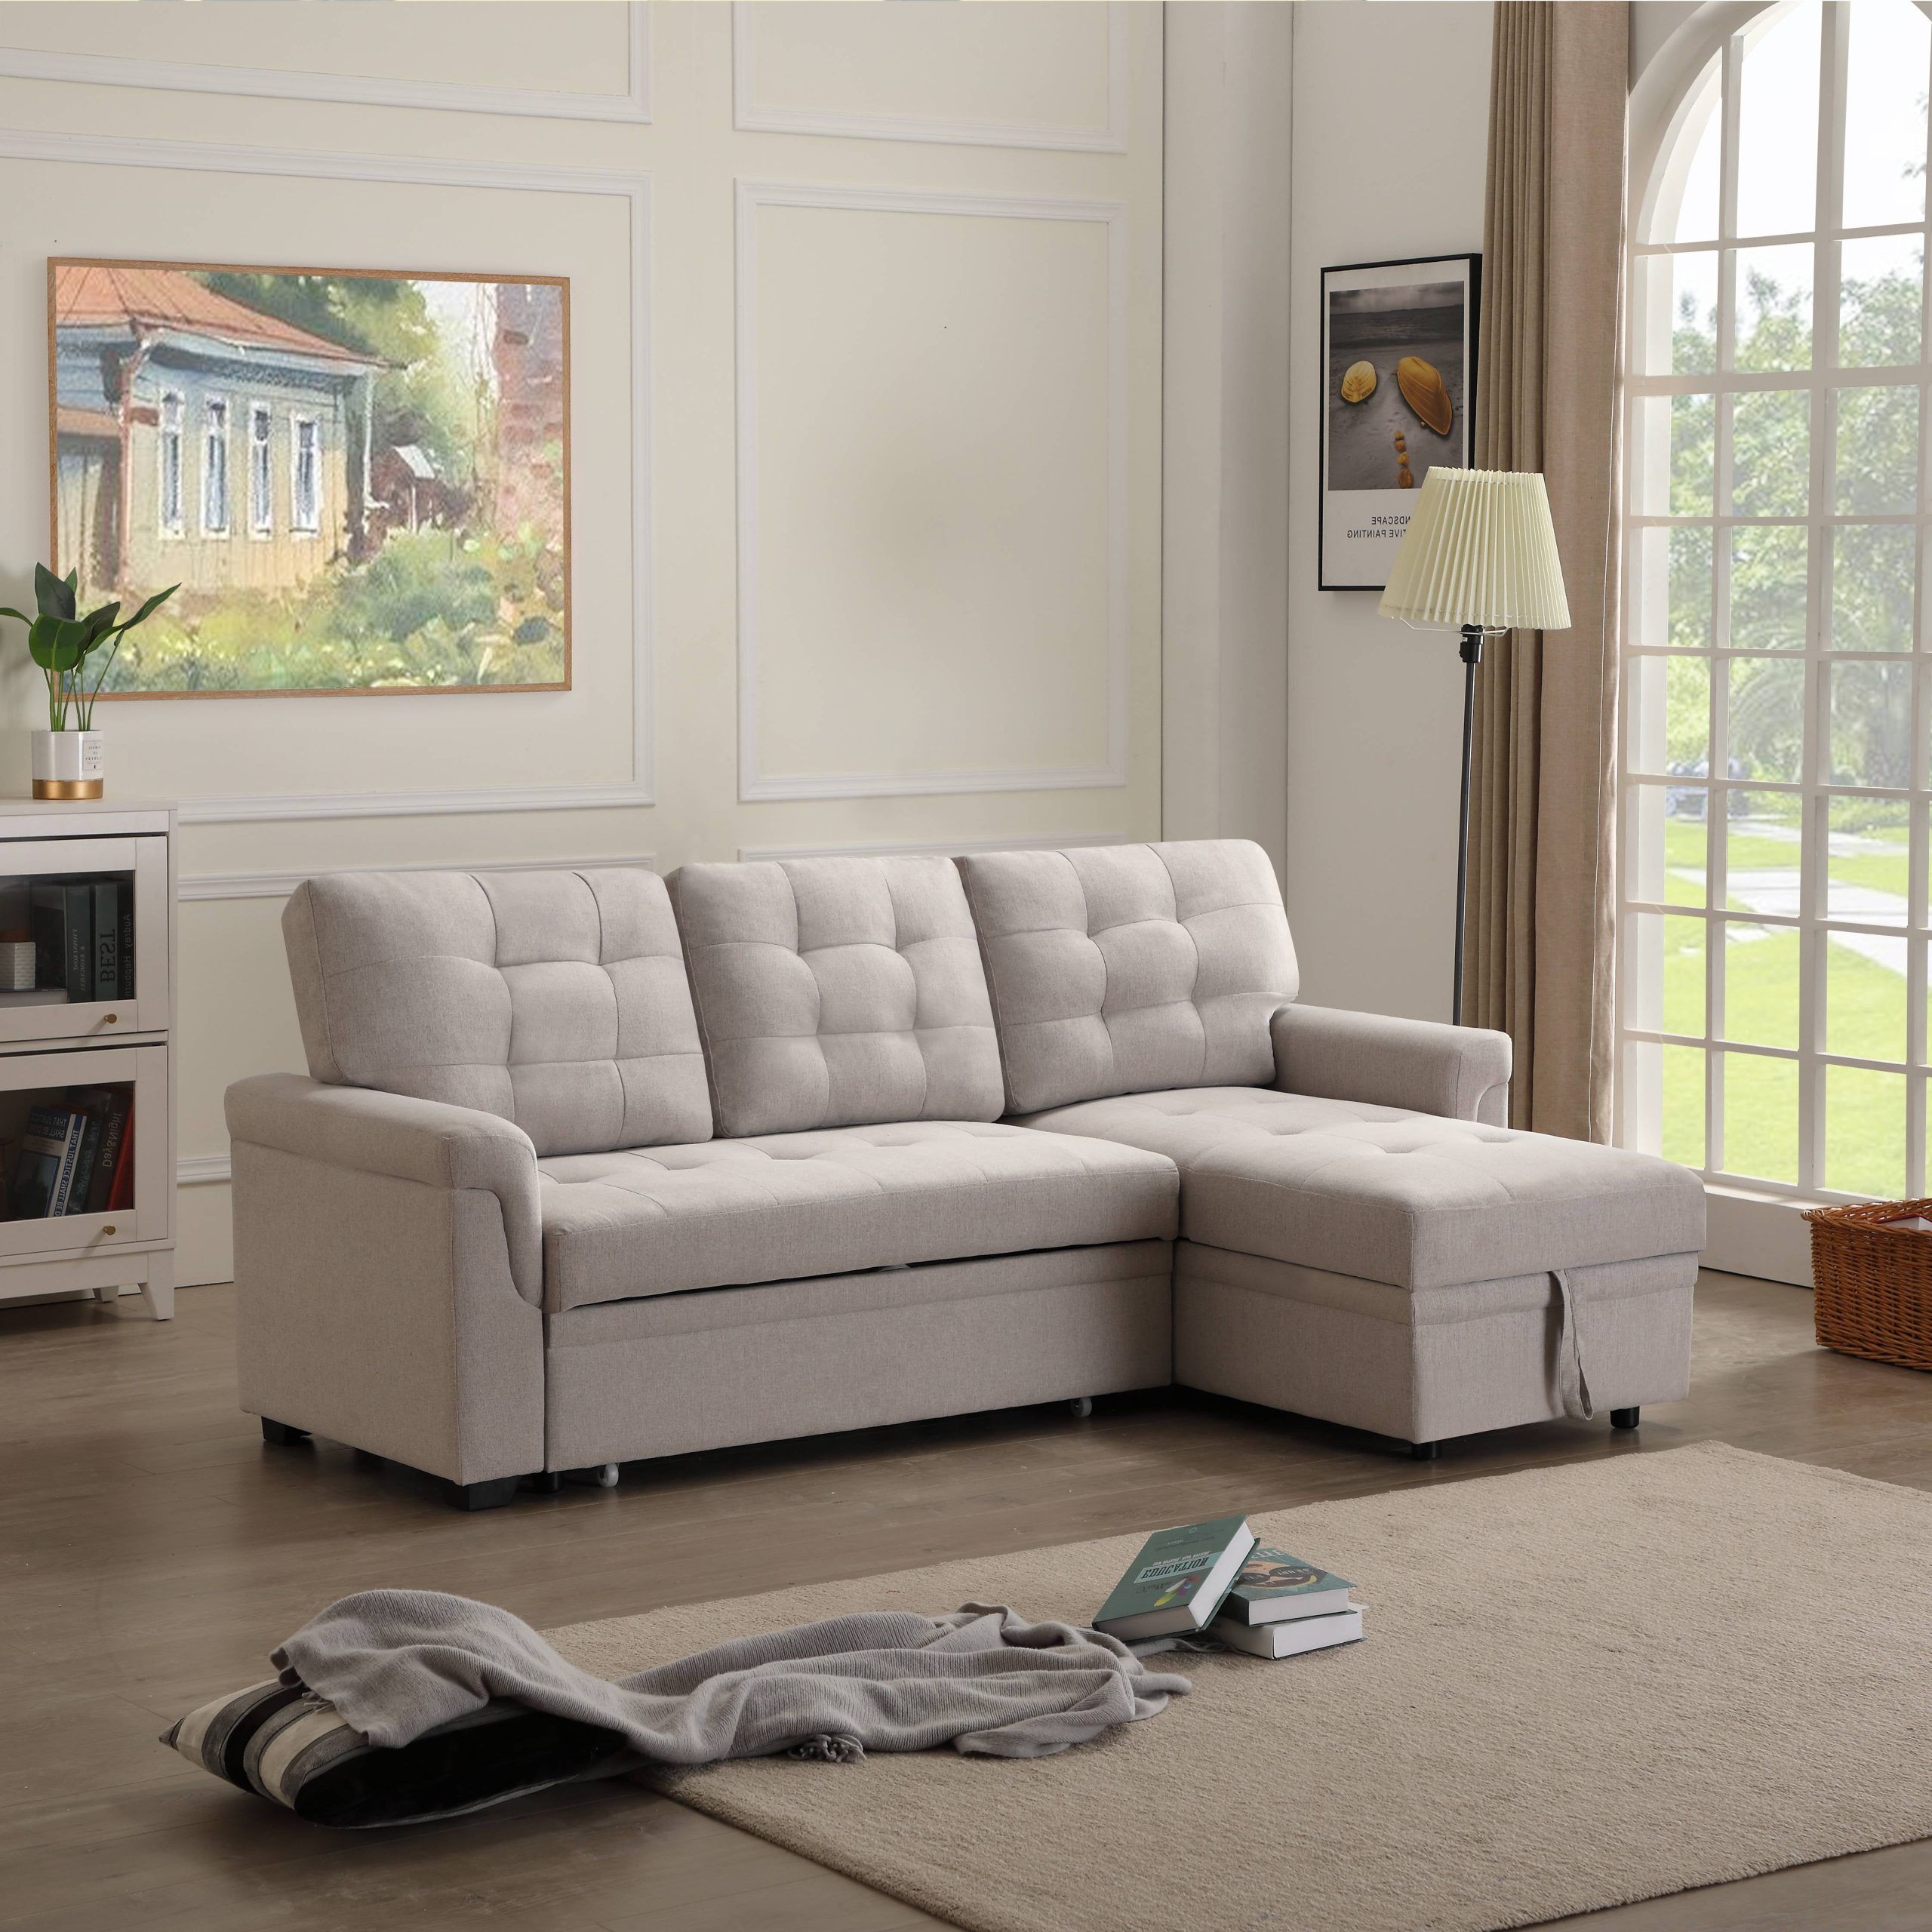 L Shaped Sectional Sofa Bed With Reversible Chaise, 86"w Modern 3 Seat Within Small L Shaped Sectional Sofas In Beige (Gallery 1 of 20)